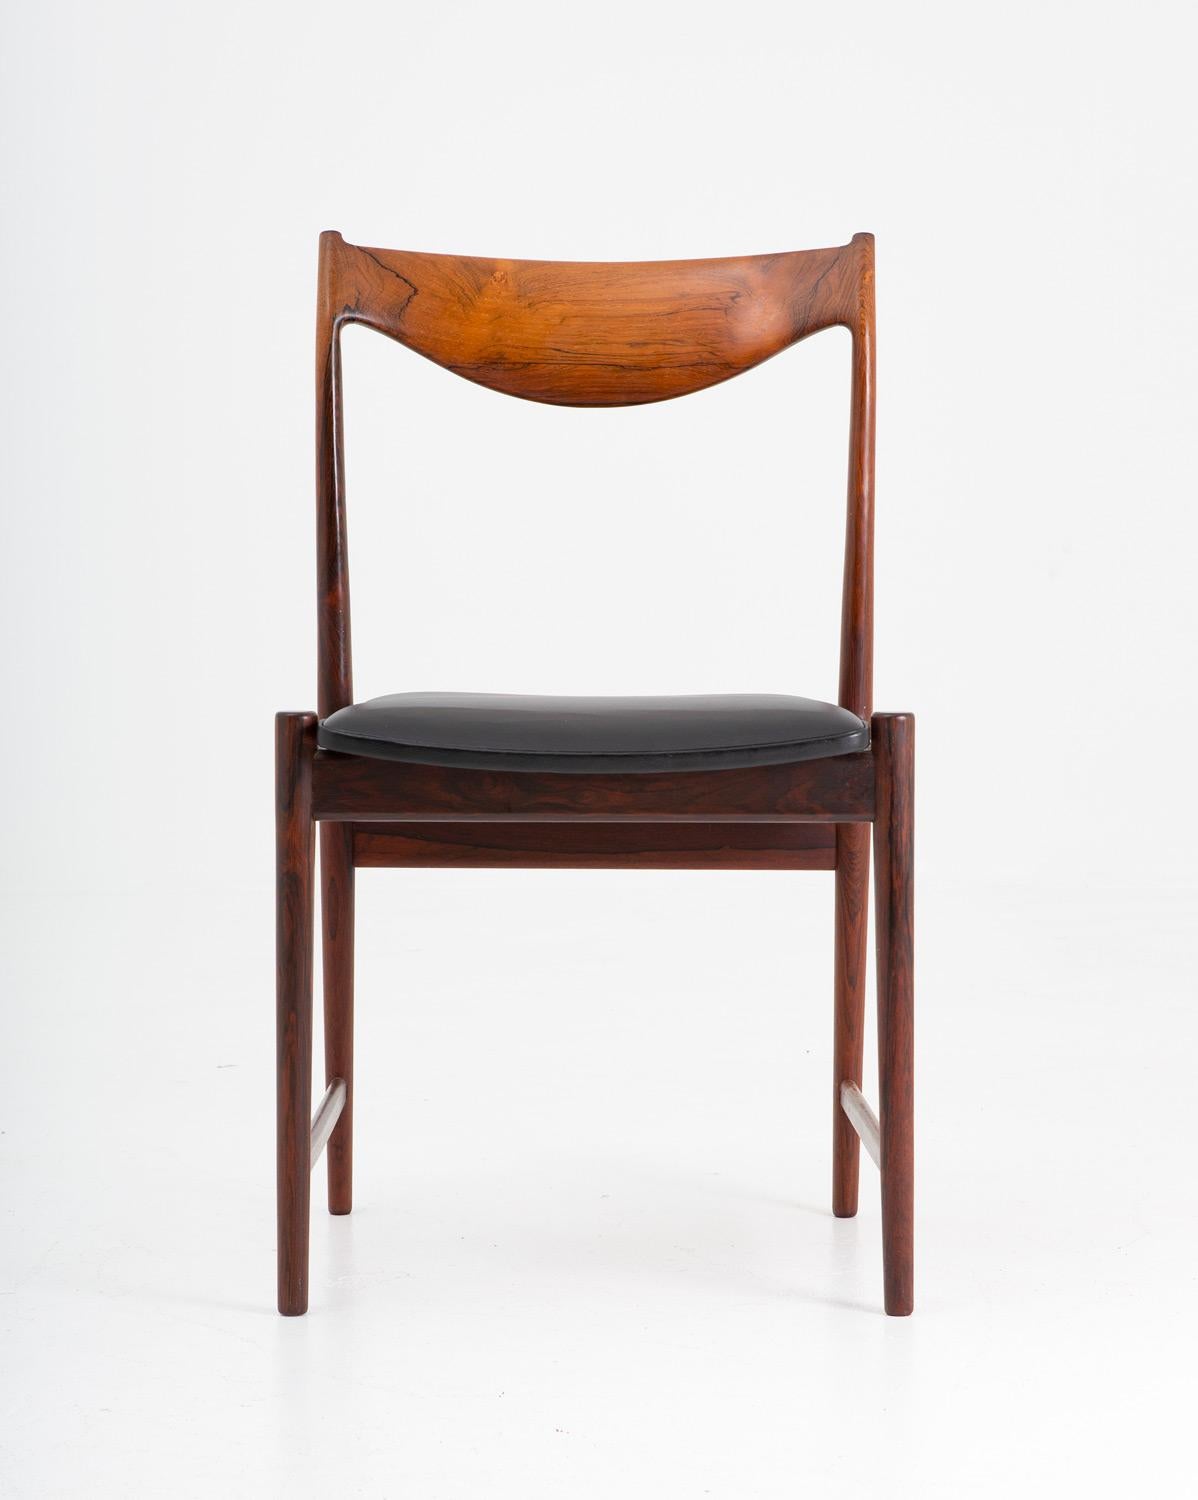 Scandinavian midcentury dining chairs model Darby by Torbjørn Afdal for Nesjestranda Møbelfabrik, Norway.
These sculptural rosewood chairs are constructed with an impressive sense for quality and design.

Condition: Close to excellent condition